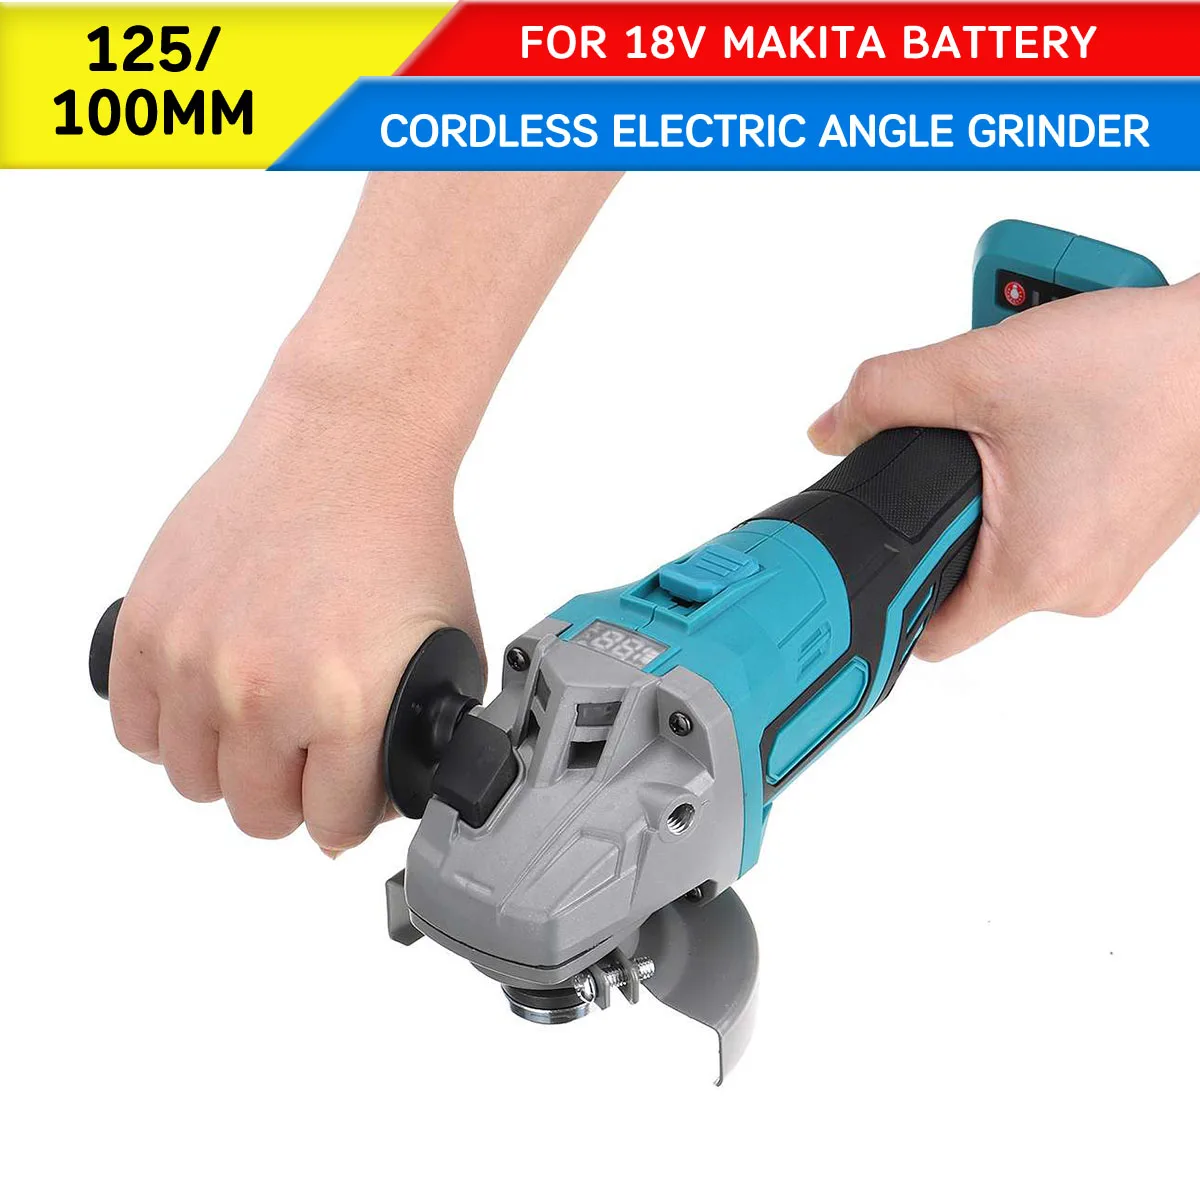 125/100MM Electric Cordless Angle Grinder Brushless Grinding Power Tool Machine Metal Woodworking Cutting For Makita Battery 18V